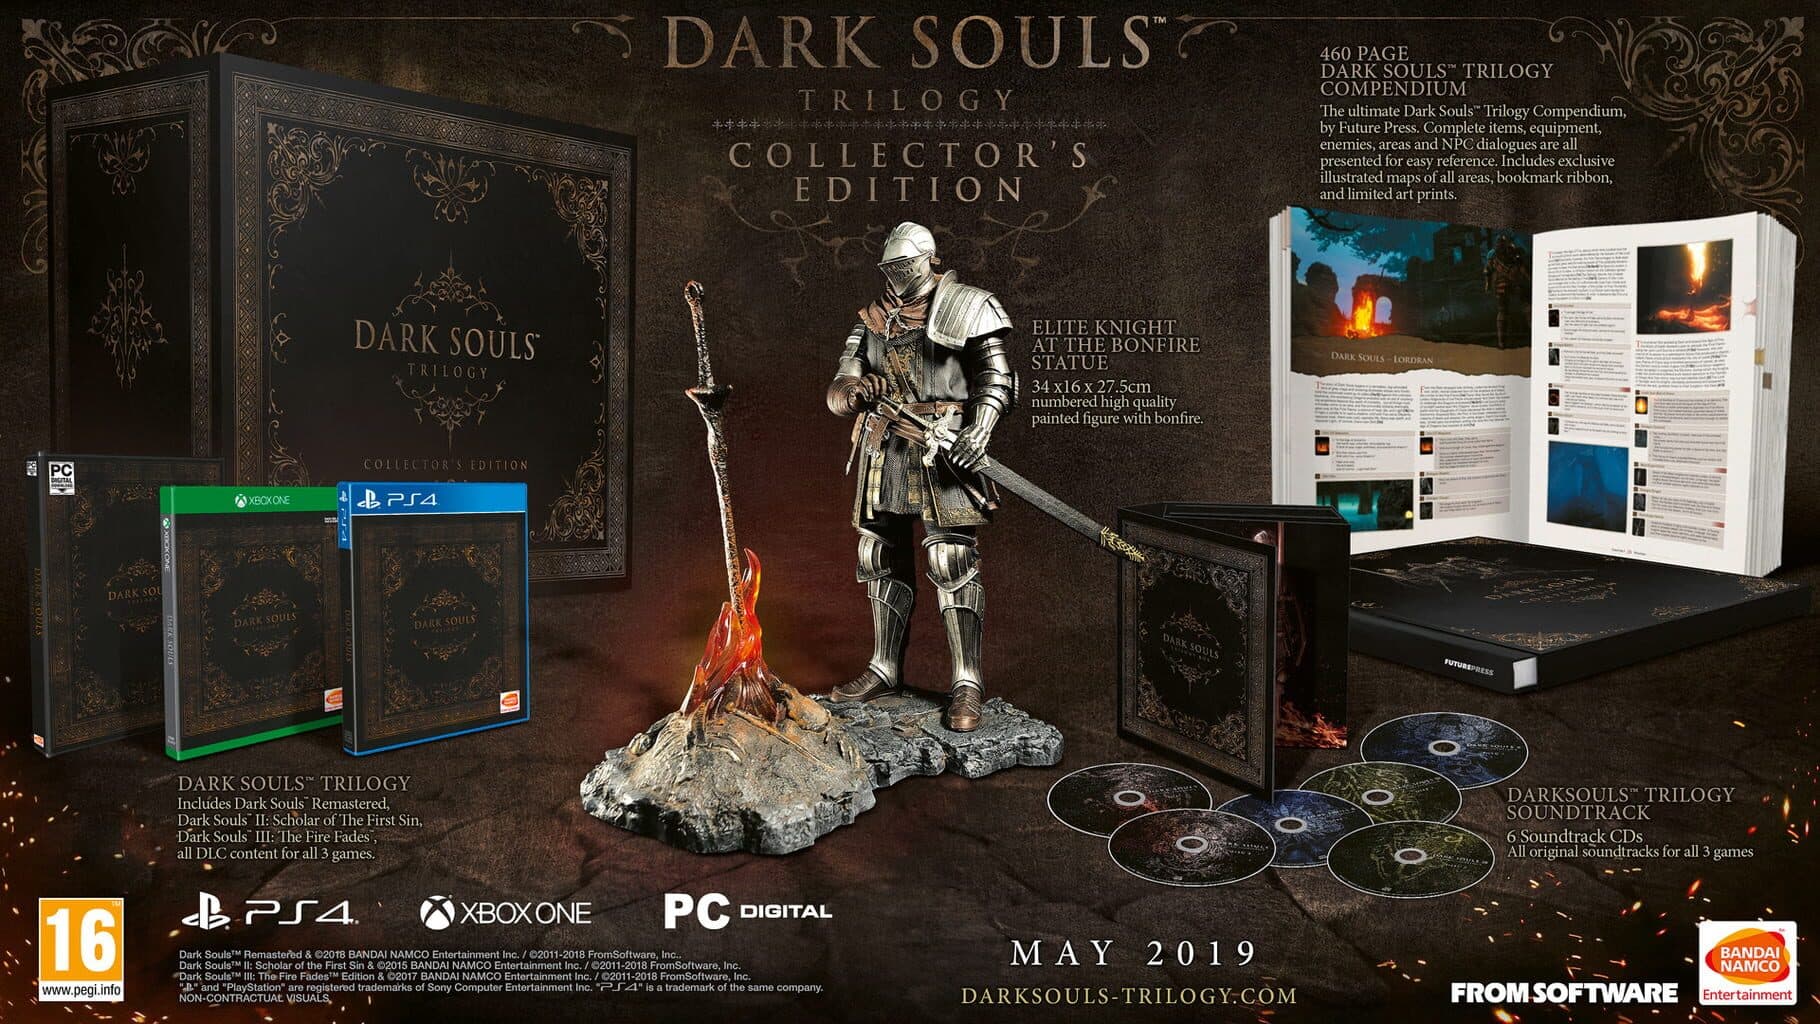 Dark Souls Trilogy: Collector's Edition Image